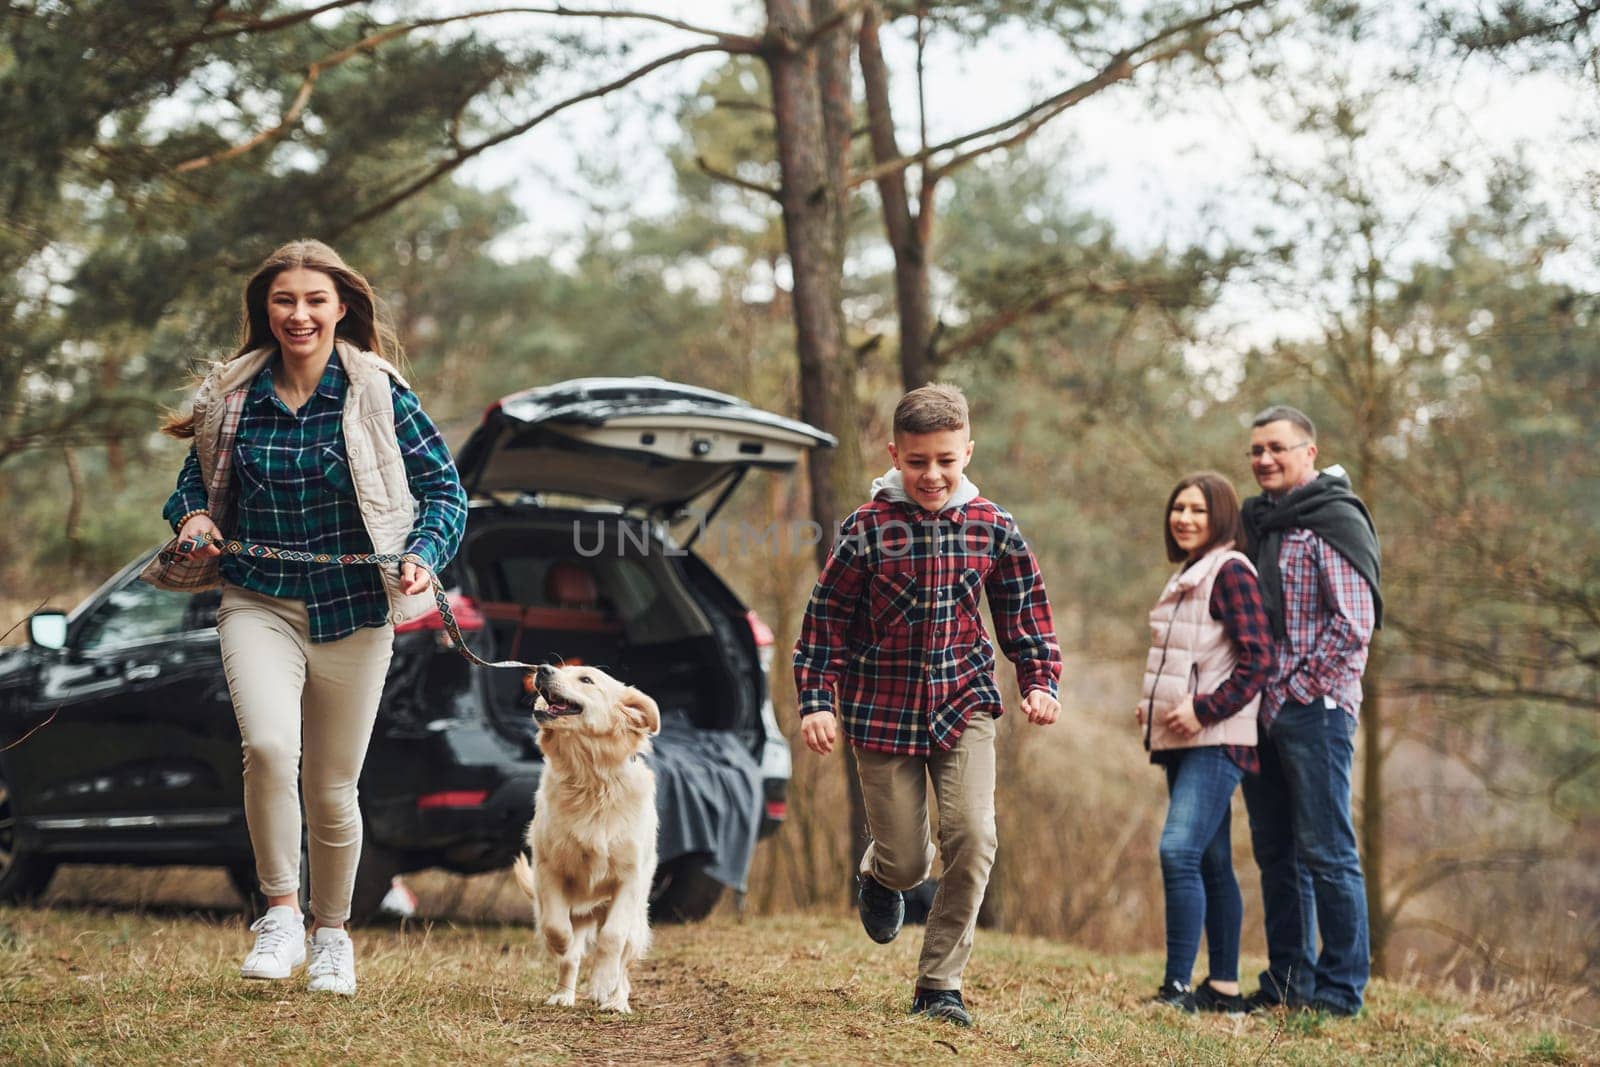 Sister and brother runs forward. Happy family have fun with their dog near modern car outdoors in forest by Standret